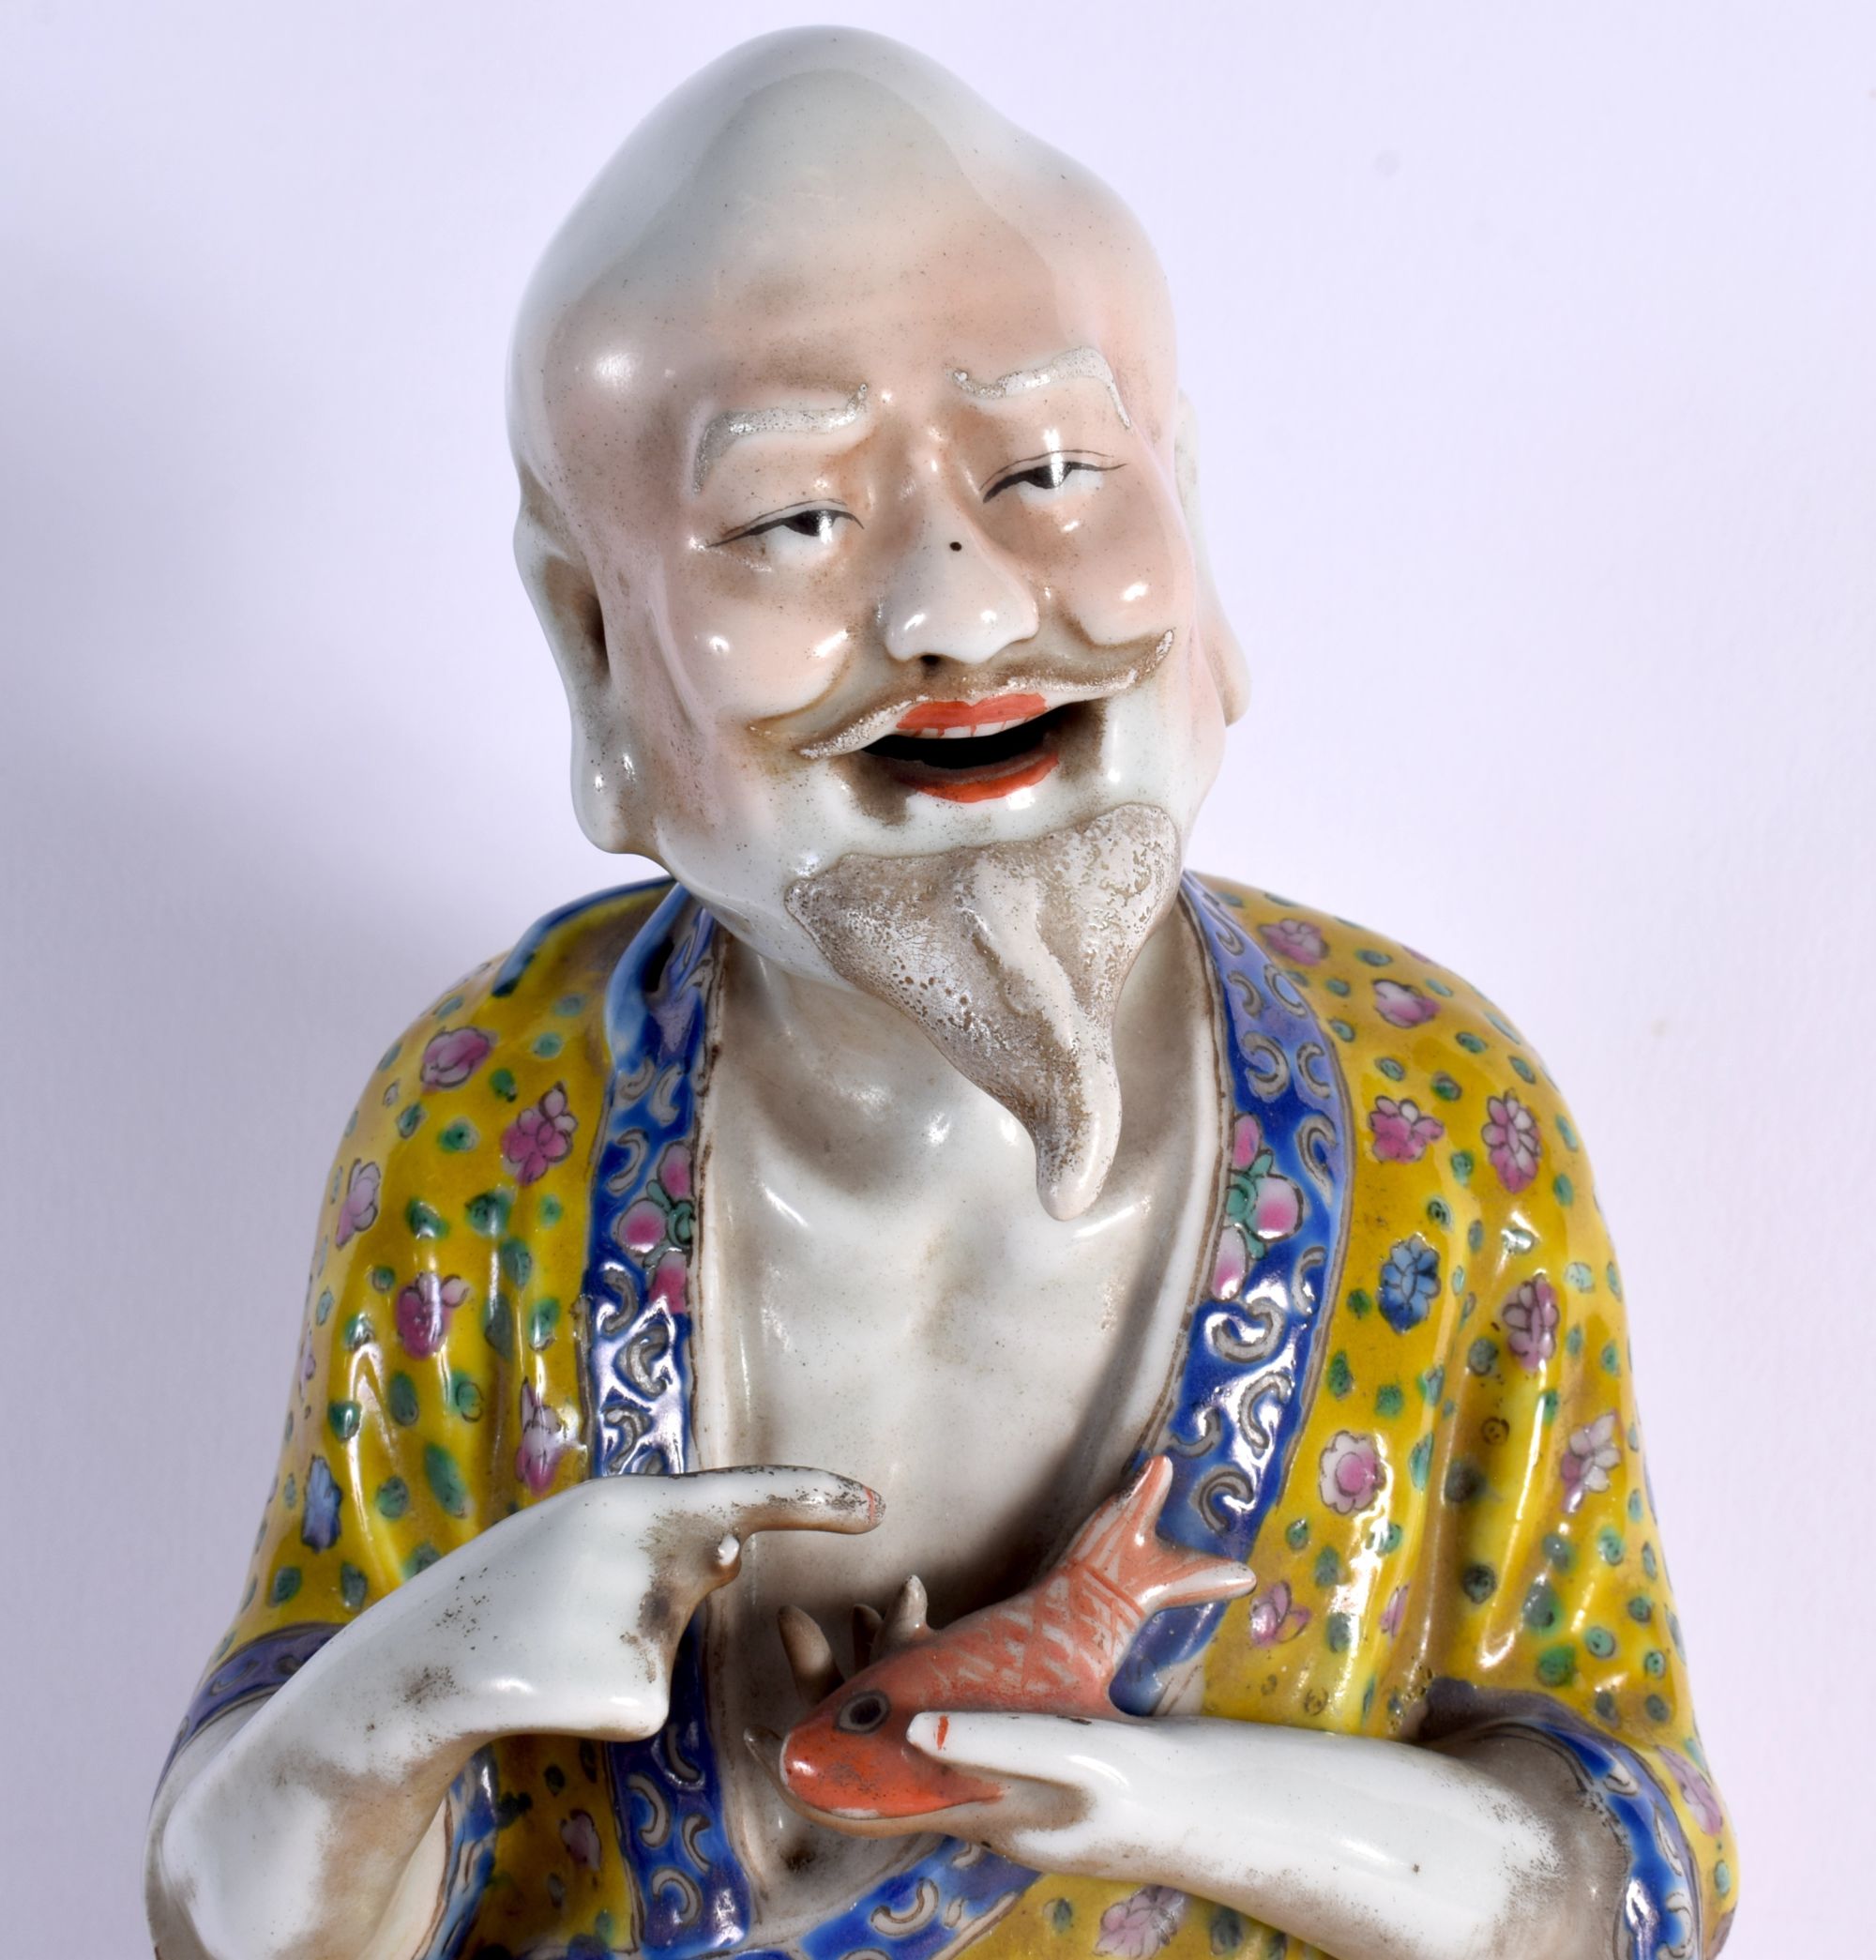 A LARGE CHINESE REPUBLICAN PERIOD PORCELAIN FIGURE OF A FISHERMAN modelled holding a fish. 42.5 cm h - Image 2 of 6